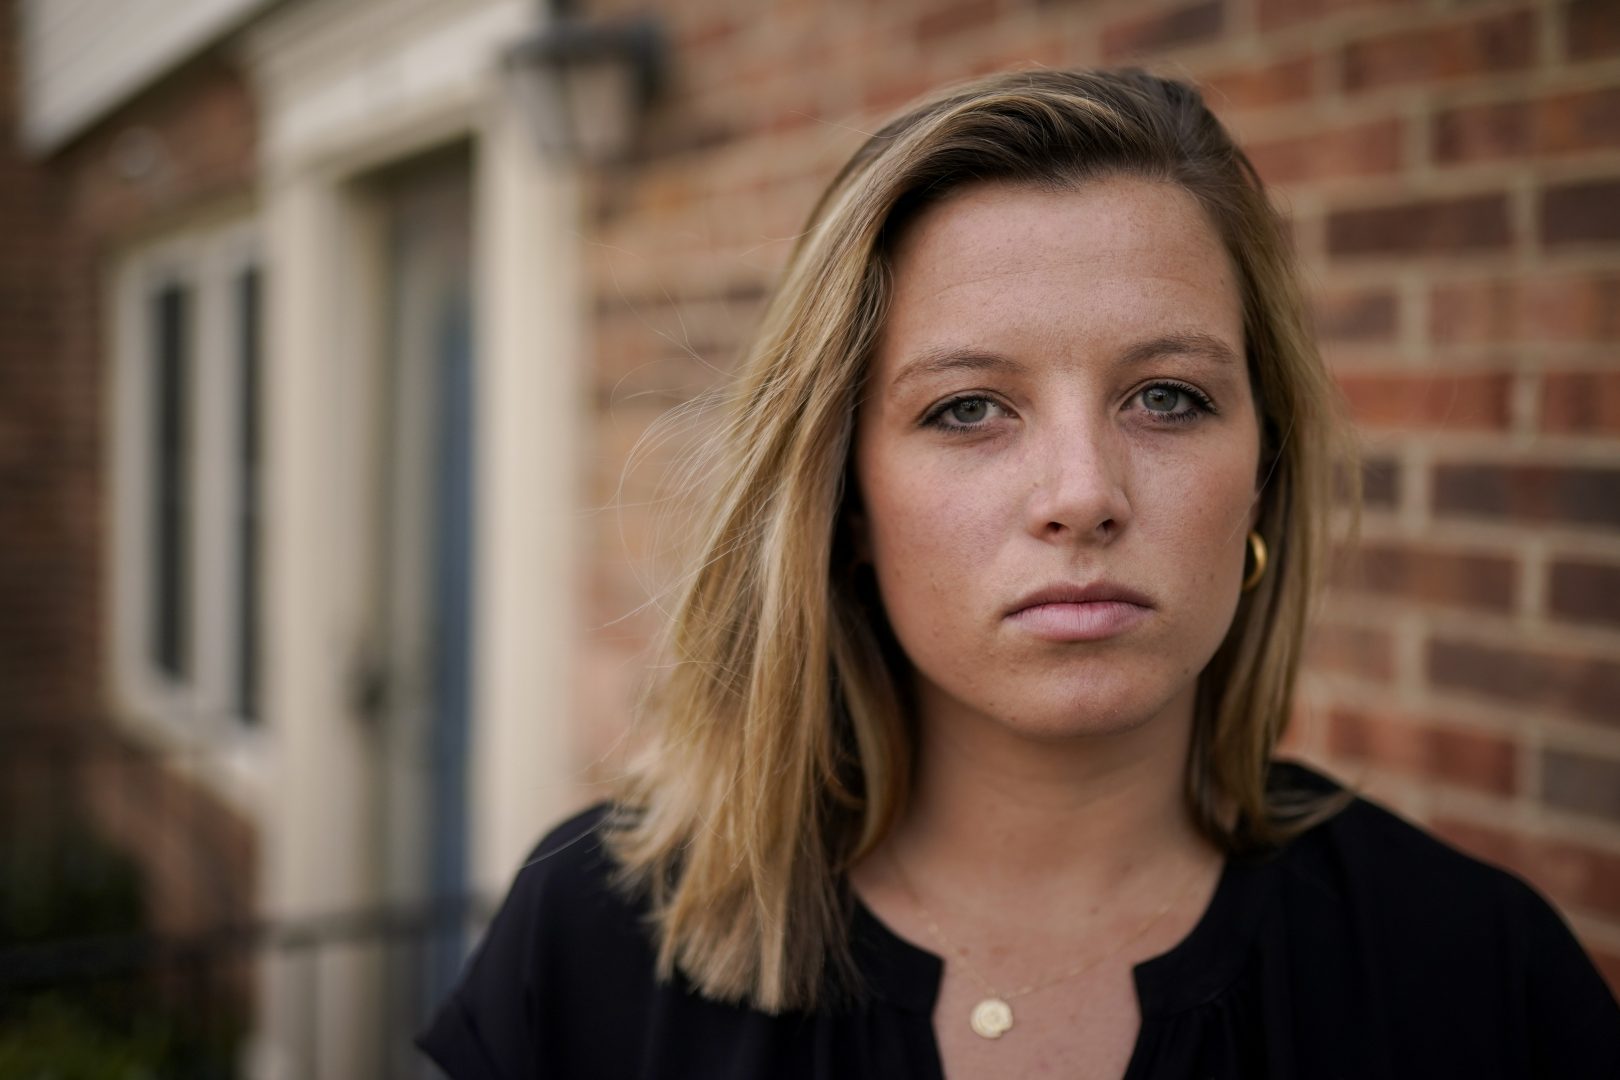 Shannon Keeler poses for a portrait in the United States on Wednesday, April 7, 2021. A series of online messages from a long-ago schoolmate has Keeler, a Gettysburg College graduate, trying again to get authorities to make an arrest in her 2013 sexual assault. 